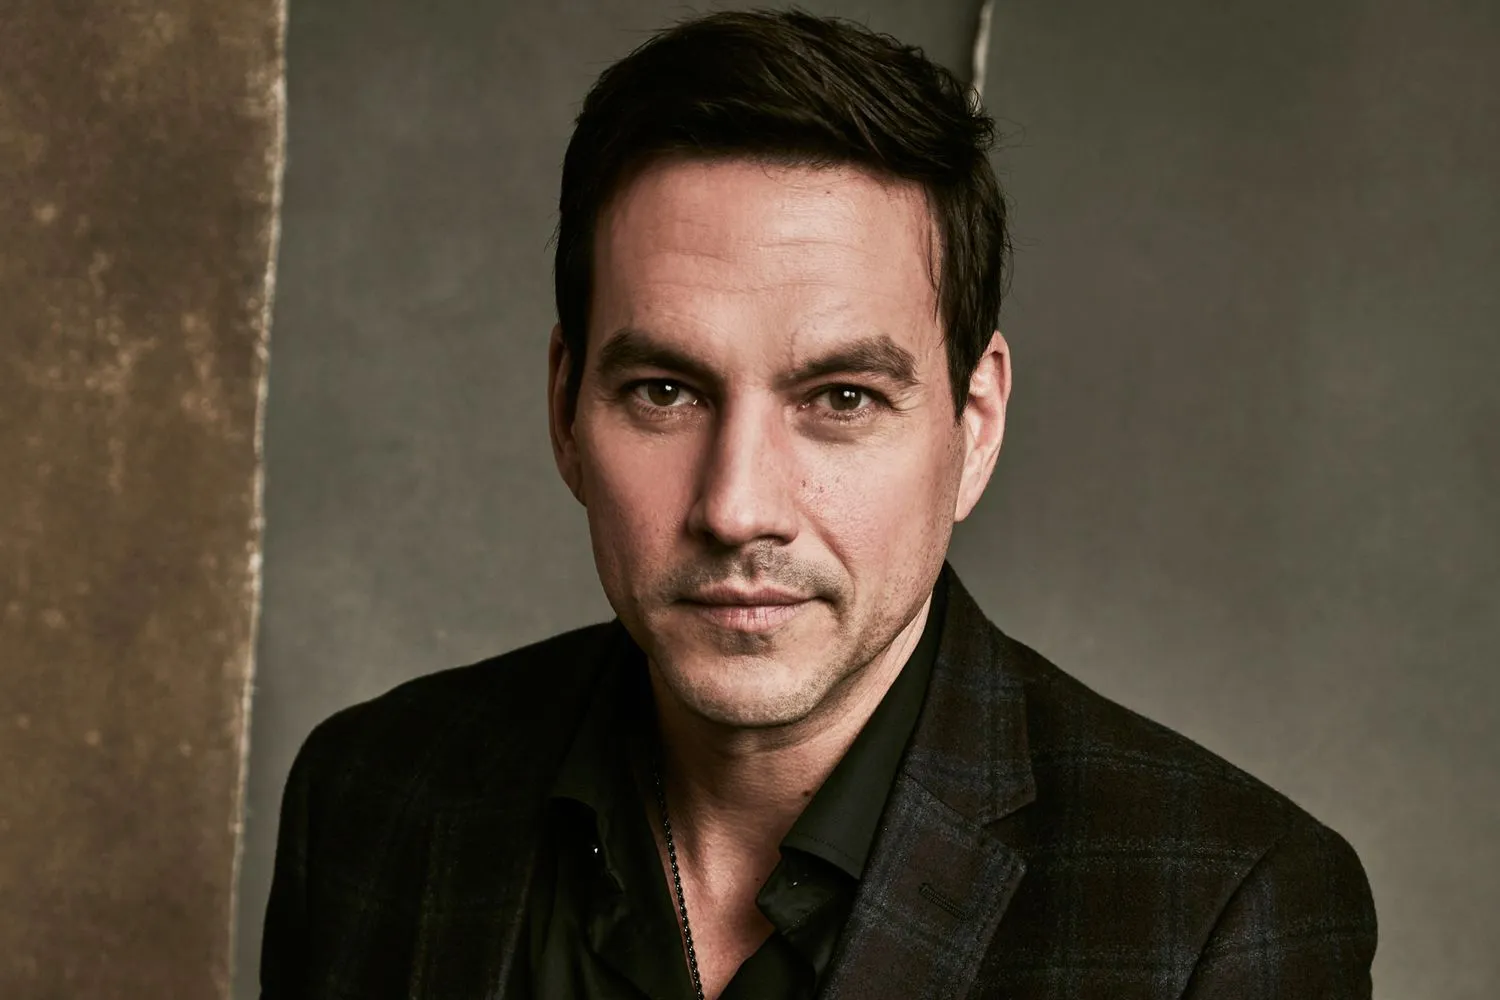 Tyler Christopher, cause of death